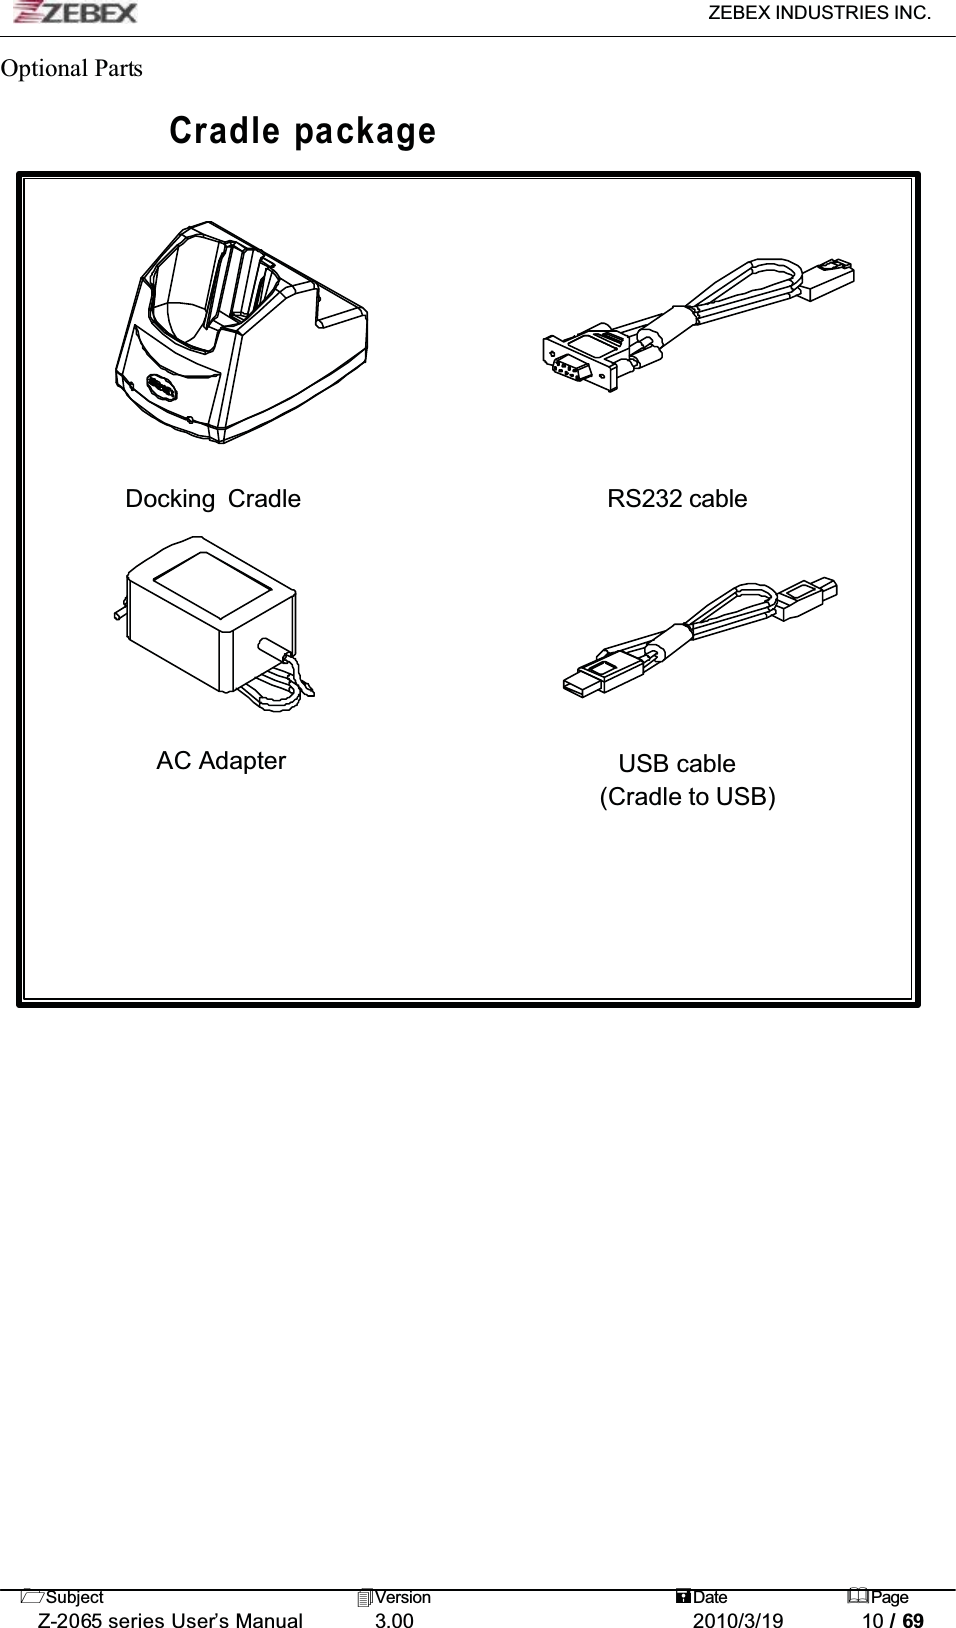 ZEBEX INDUSTRIES INC. Subject Version Date PageZ-2065 series User’s Manual 3.00 2010/3/19 10 / 69Optional PartsCradle packageDocking Cradle RS232 cableAC Adapter USB cable (Cradle to USB)